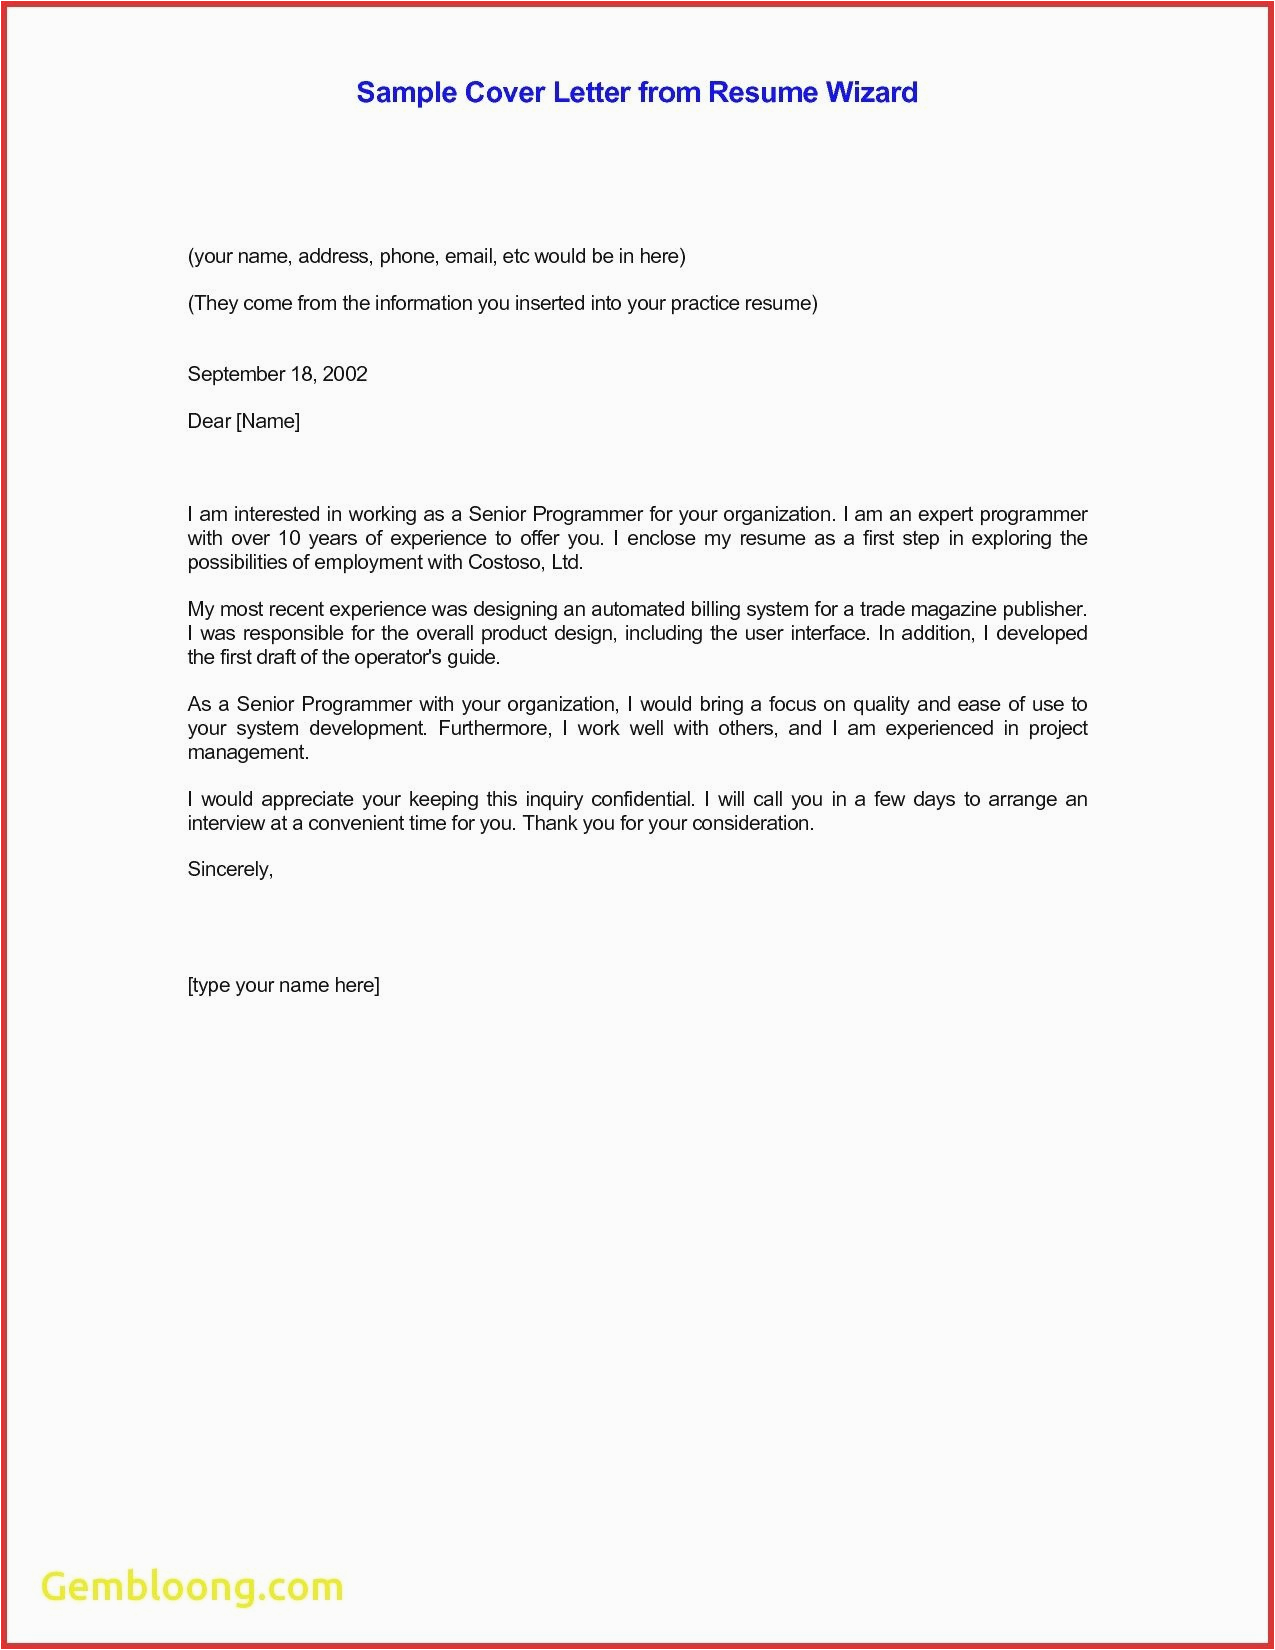 Email with Resume and Cover Letter attached Sample Email Cv Cover Letter Template